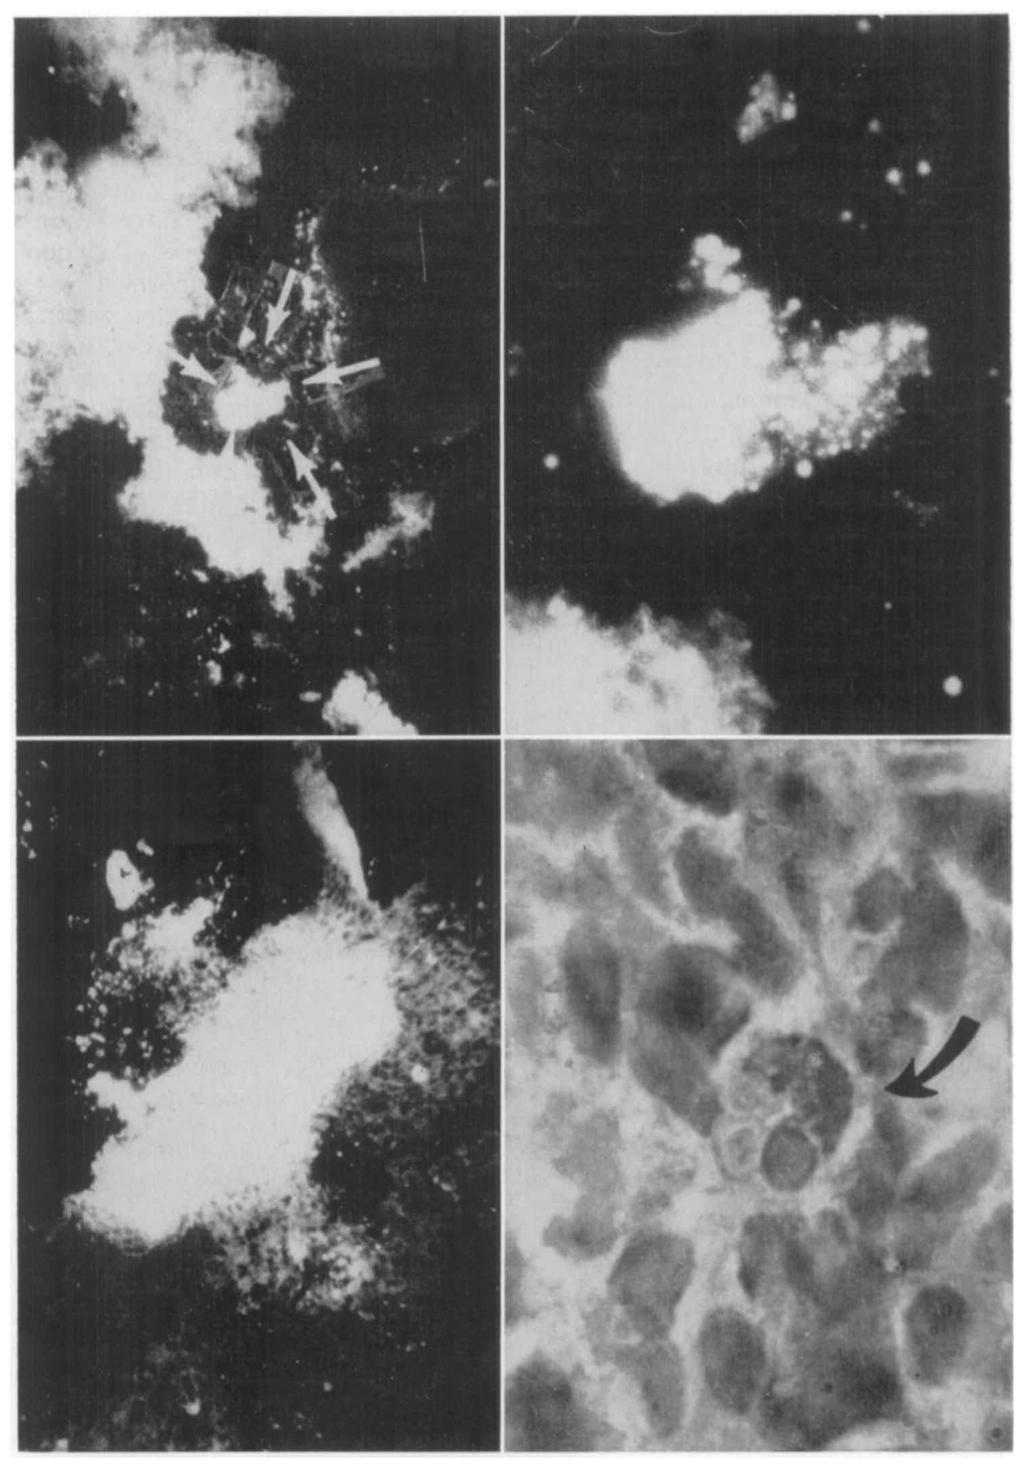 Figure 1 was prepared from the fetus of a rabbit that was infected 13 days after breeding, and Figure 2 is a higlier magnification of the portion indicated by arroius in